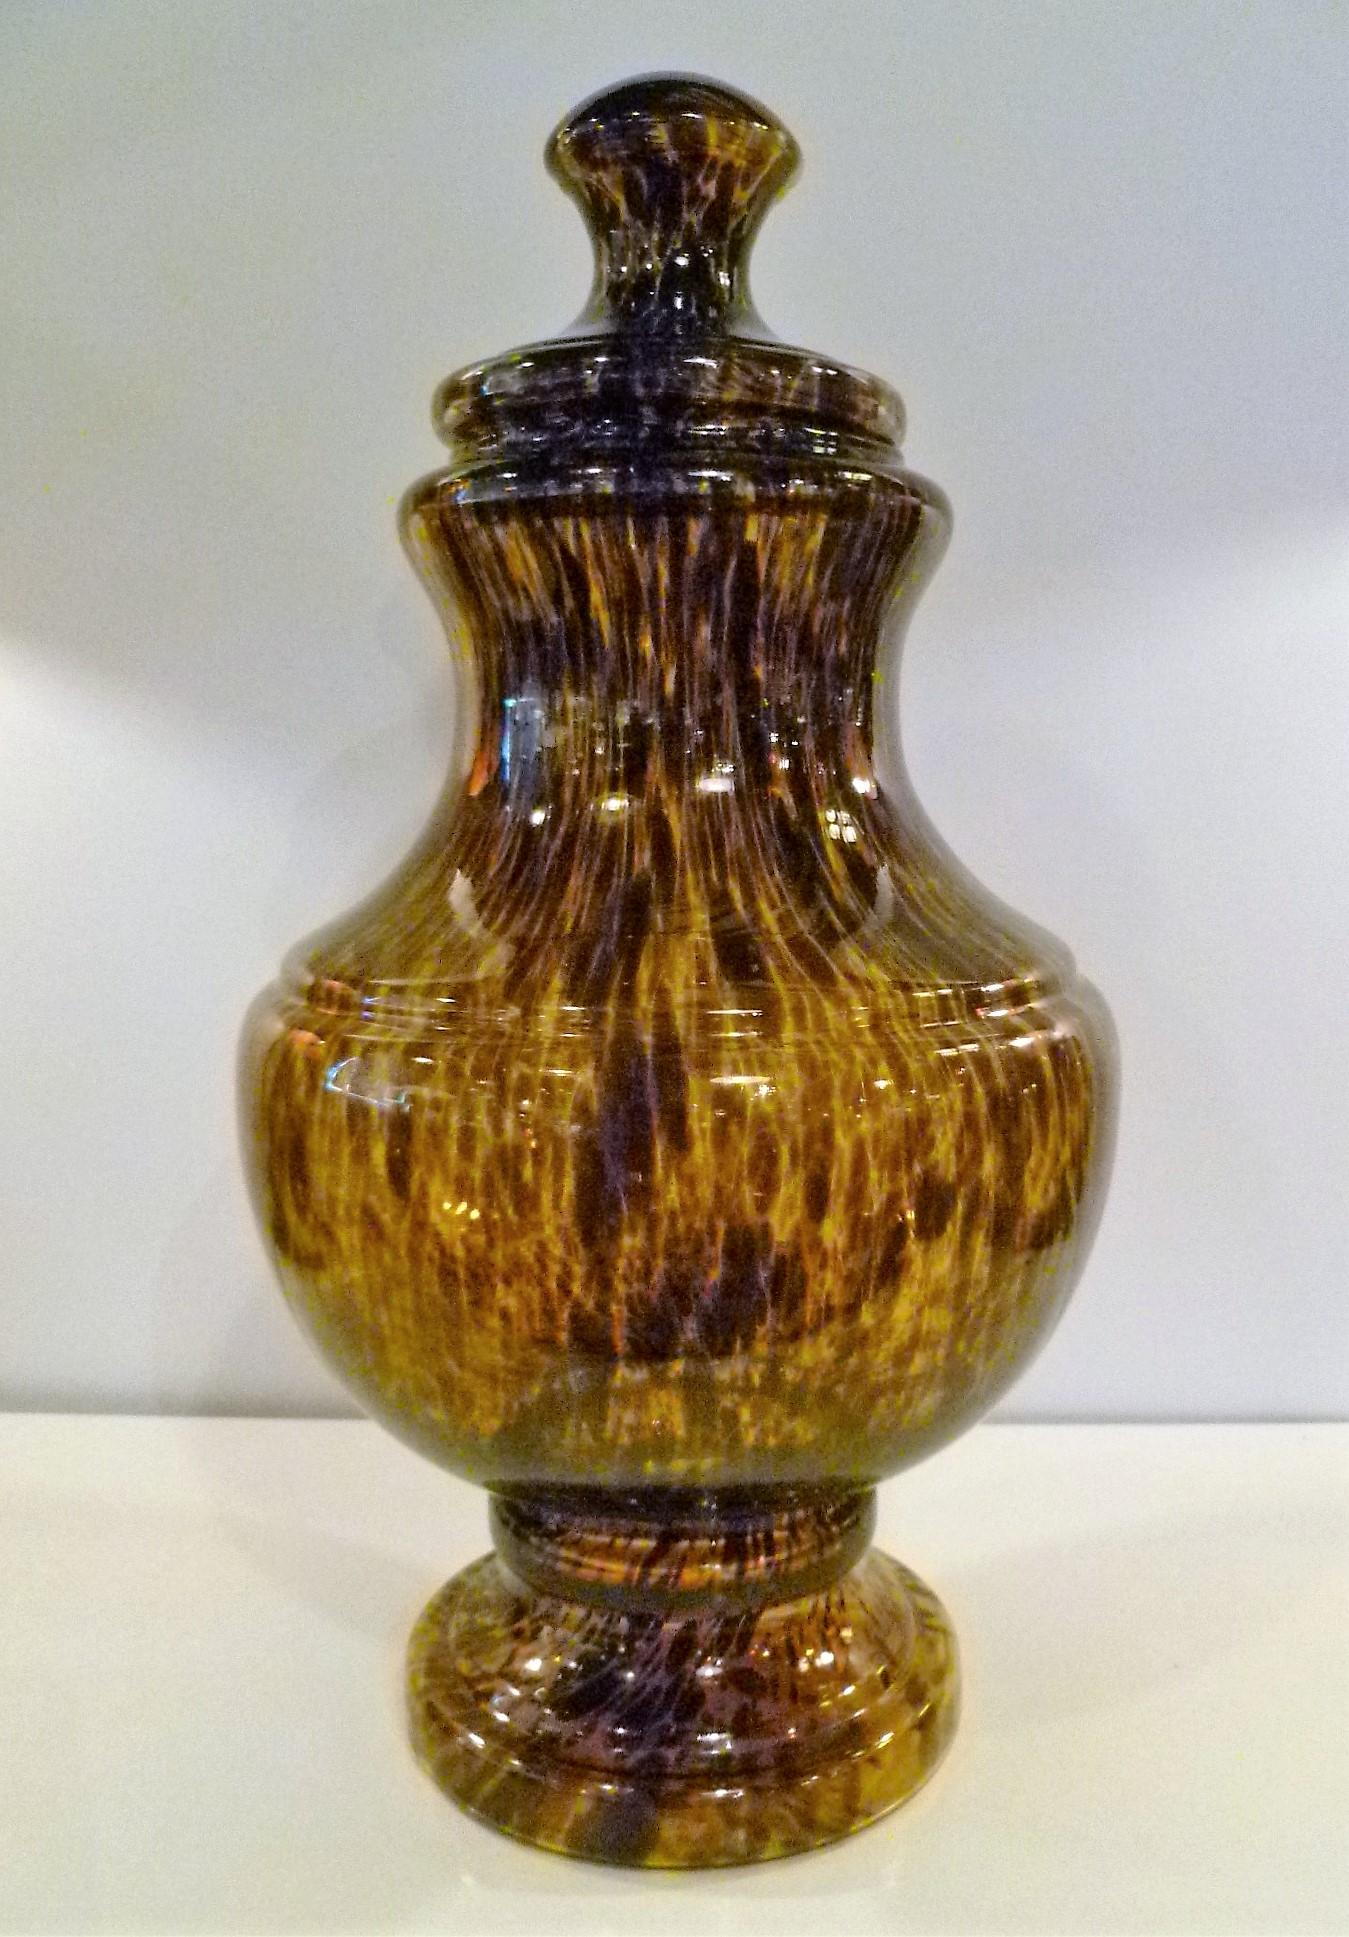 REDUCED FROM $950....Classic and elegant, very tall and large handmade Italian glass covered urn in a tortoiseshell design from late the 1960s and early 1970s, a period when modern decorative arts from Italy were in vogue.
The Tartaruga (tortoise)